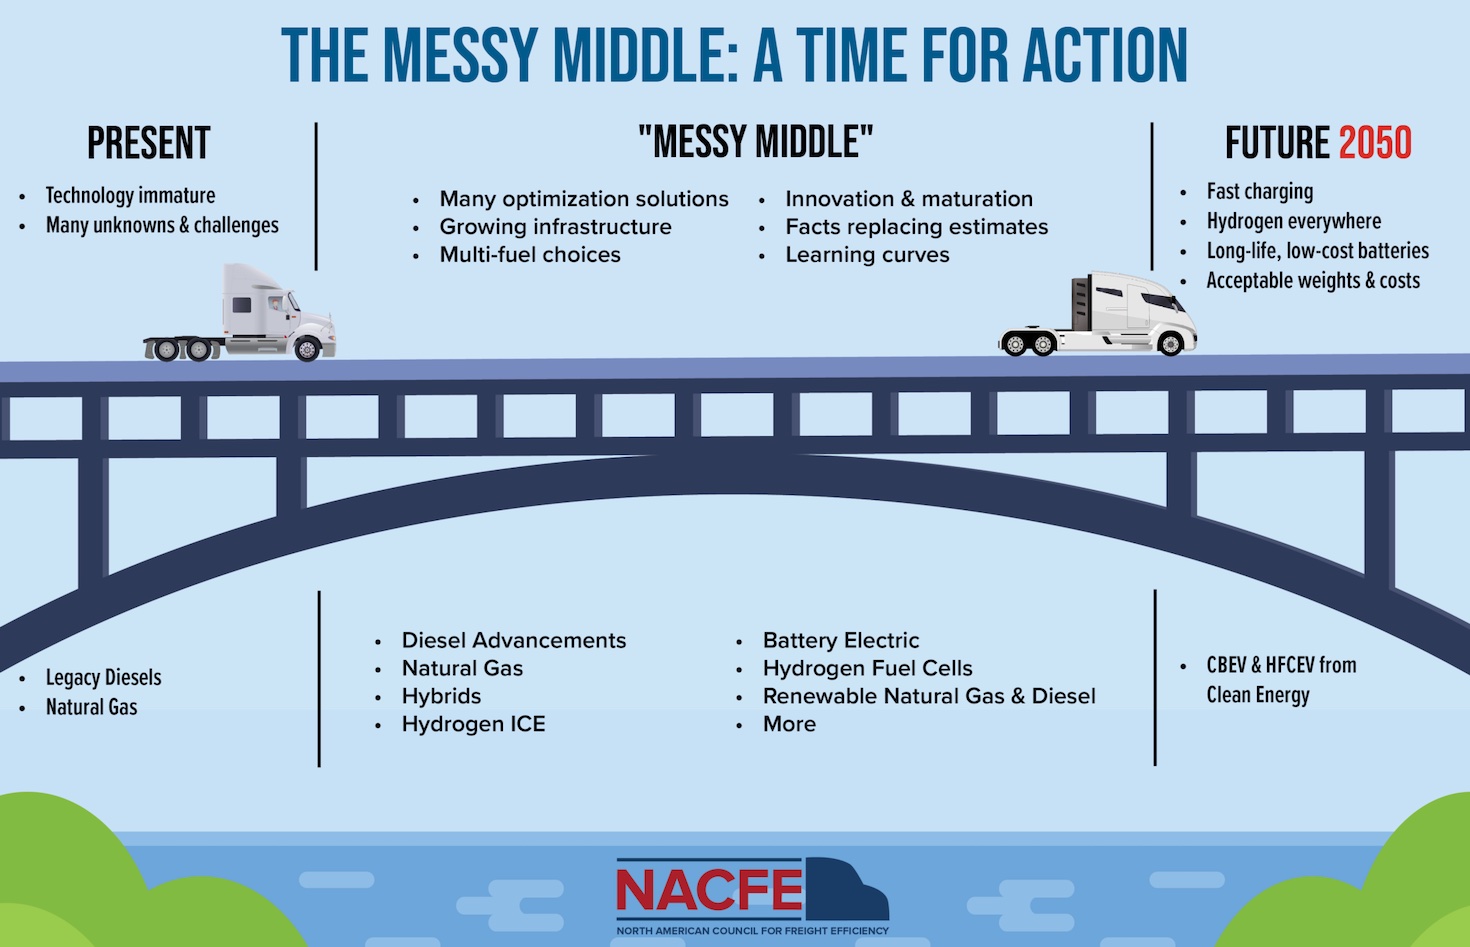 NACFE’s The Messy Middle: A Time for Action graphic